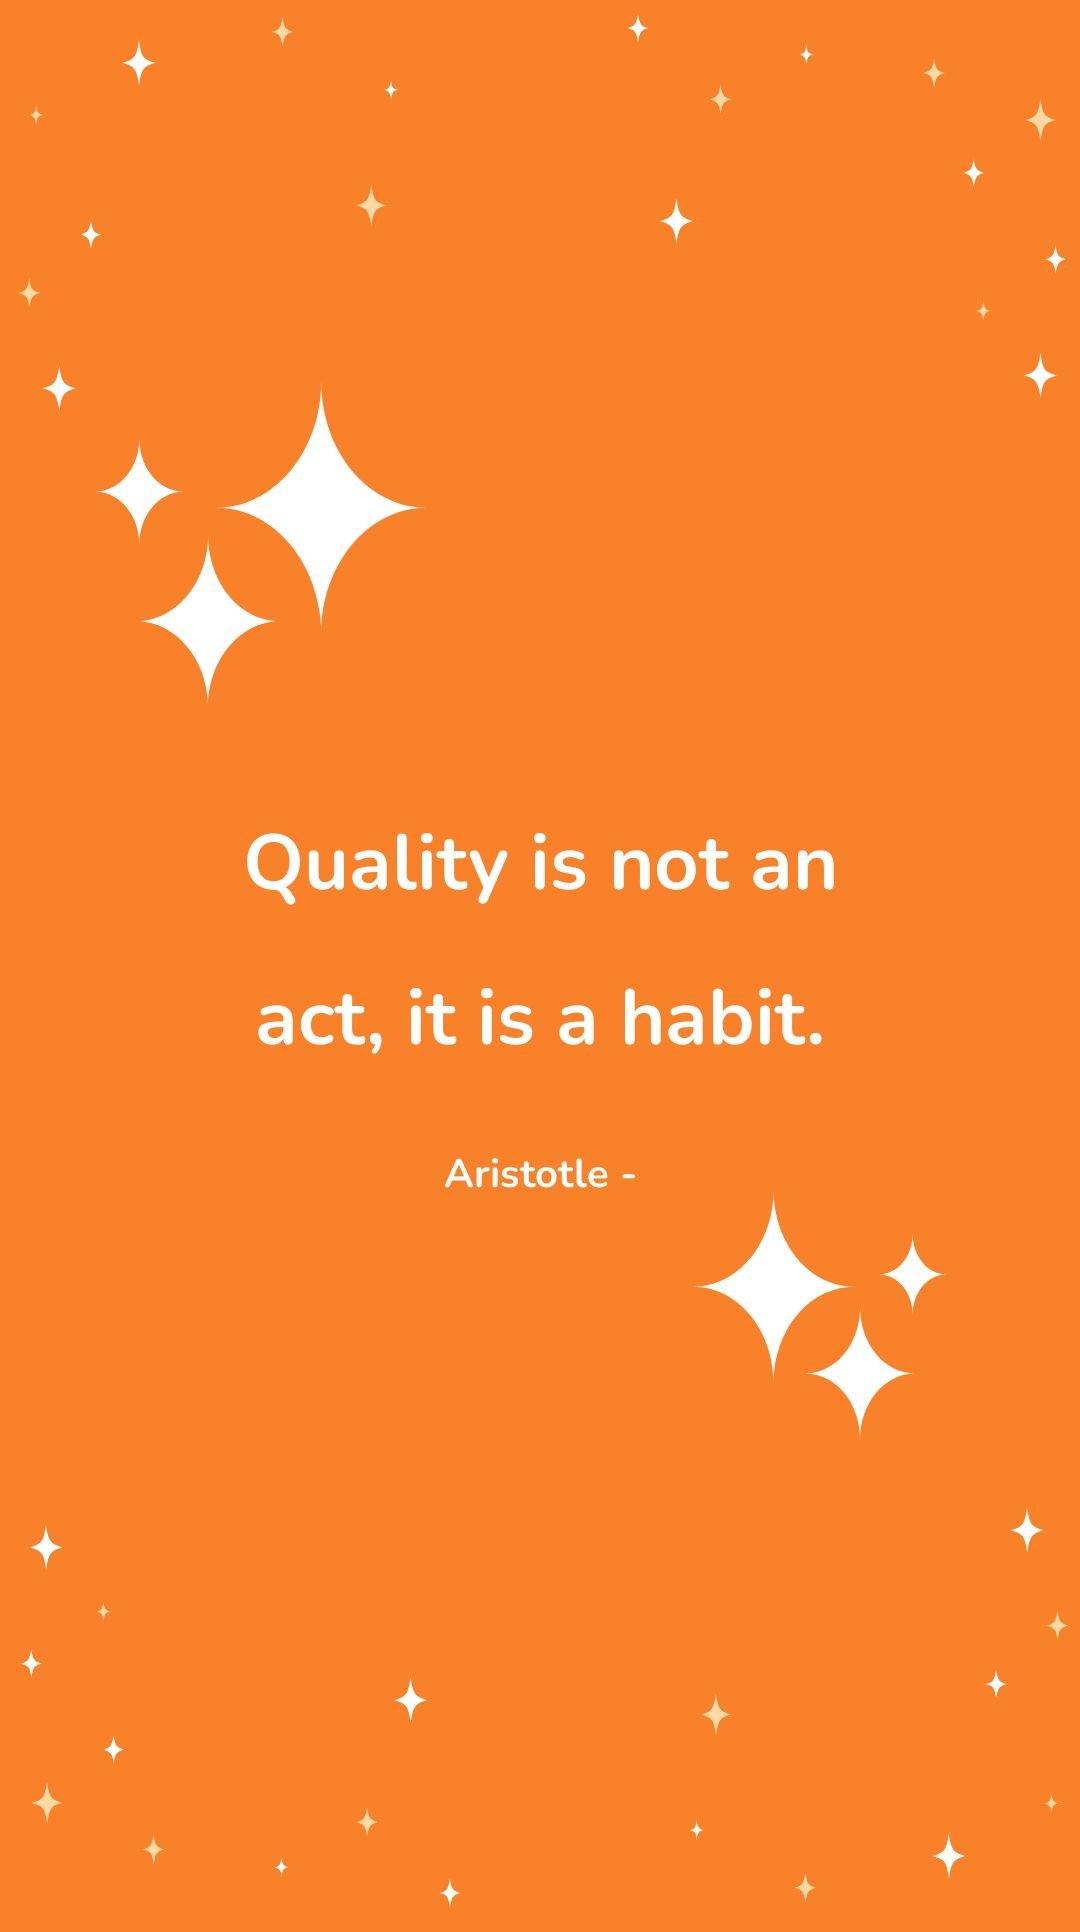 Aristotle - Quality is not an act, it is a habit.